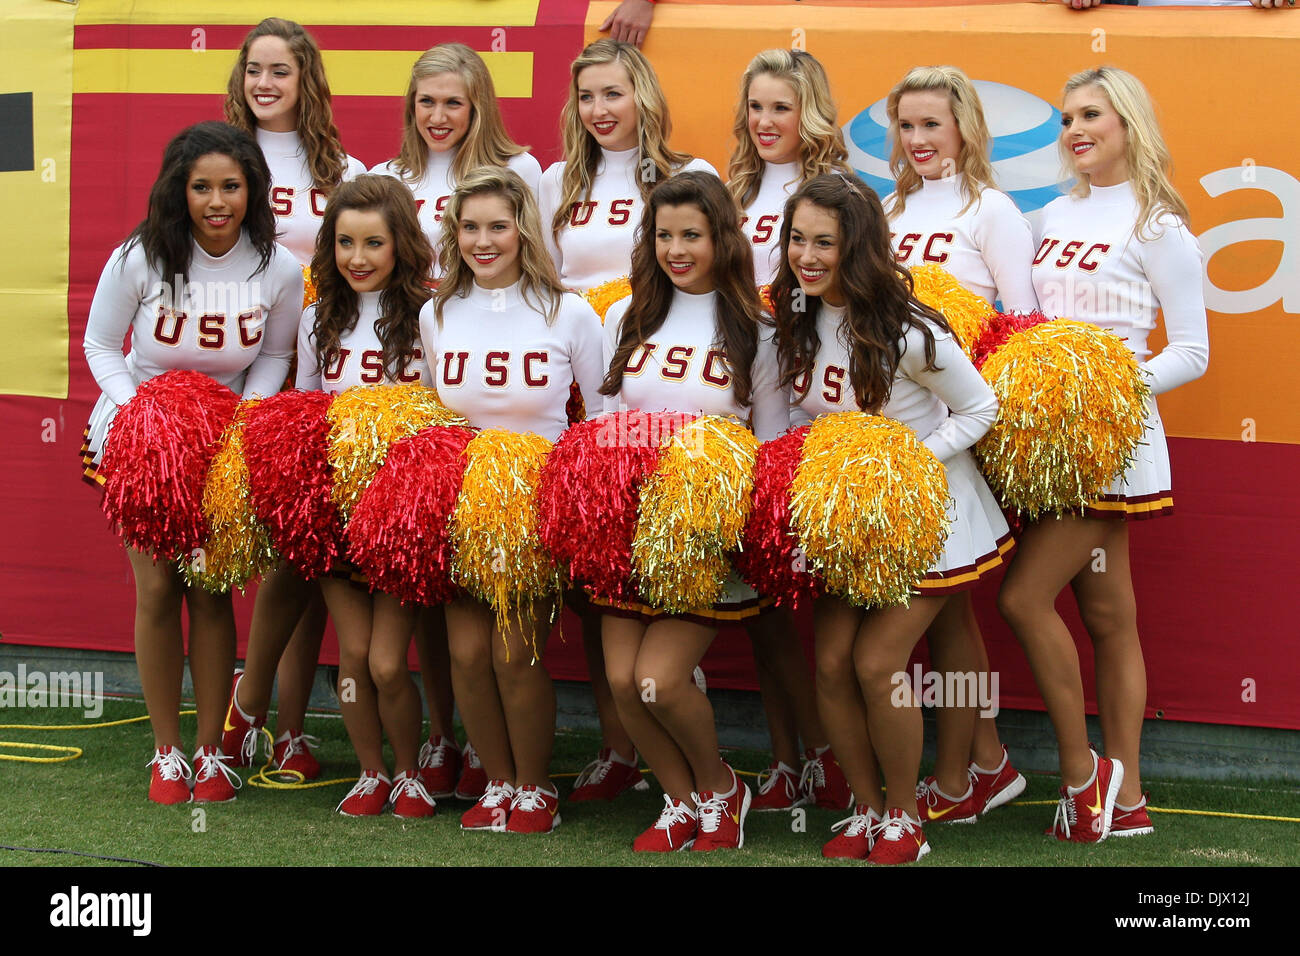 Oct. 16, 2010 - Los Angeles, California, United States of America - The USC cheerleaders pose for a group photo before the USC Trojans vs California Golden Bears game at the Los Angeles Memorial Coliseum. The Trojans went on to defeat the Golden Bears with a final score of 48-14. (Credit Image: © Brandon Parry/Southcreek Global/ZUMApress.com) Stock Photo